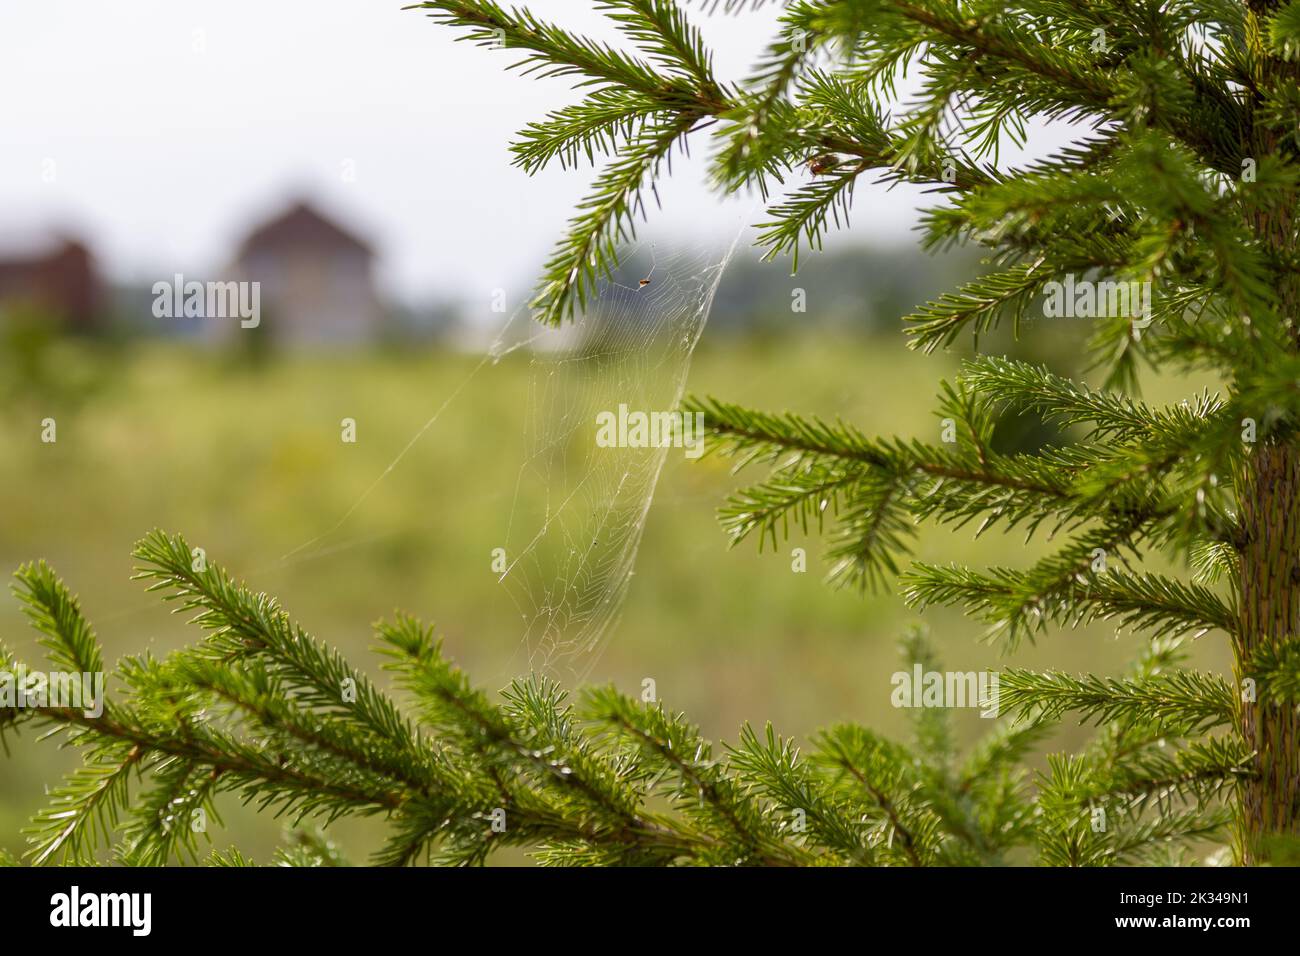 A web on the Christmas tree against the background of a suburban cottage. Stock Photo